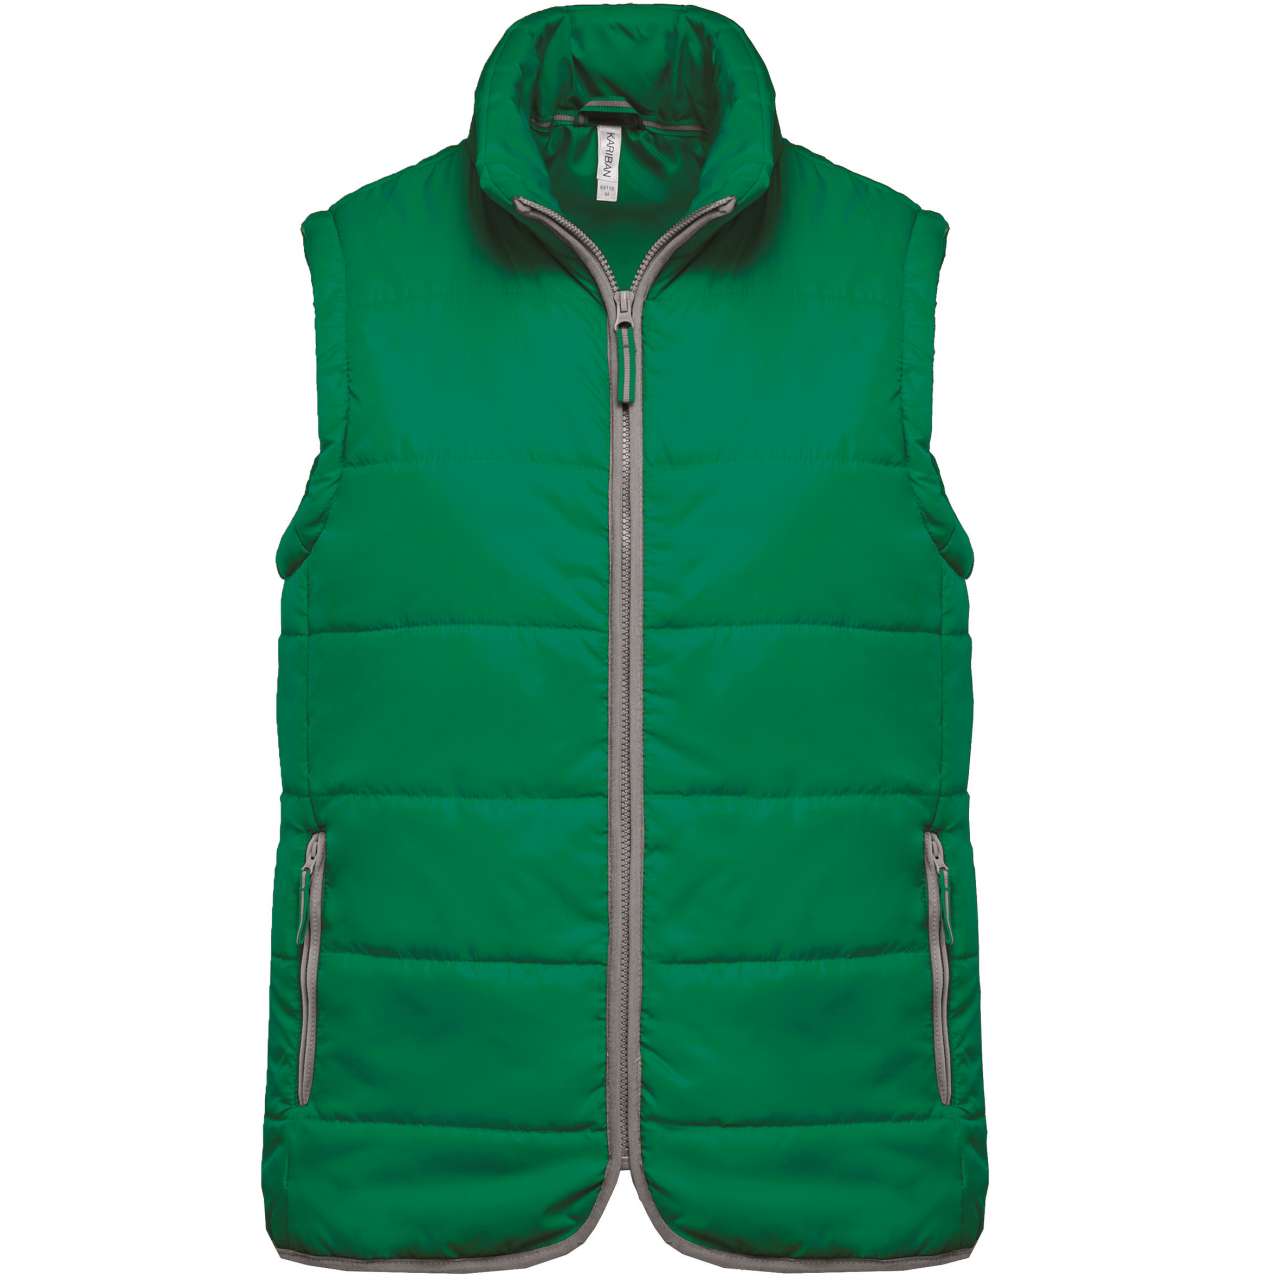 QUILTED BODYWARMER s logom firme 